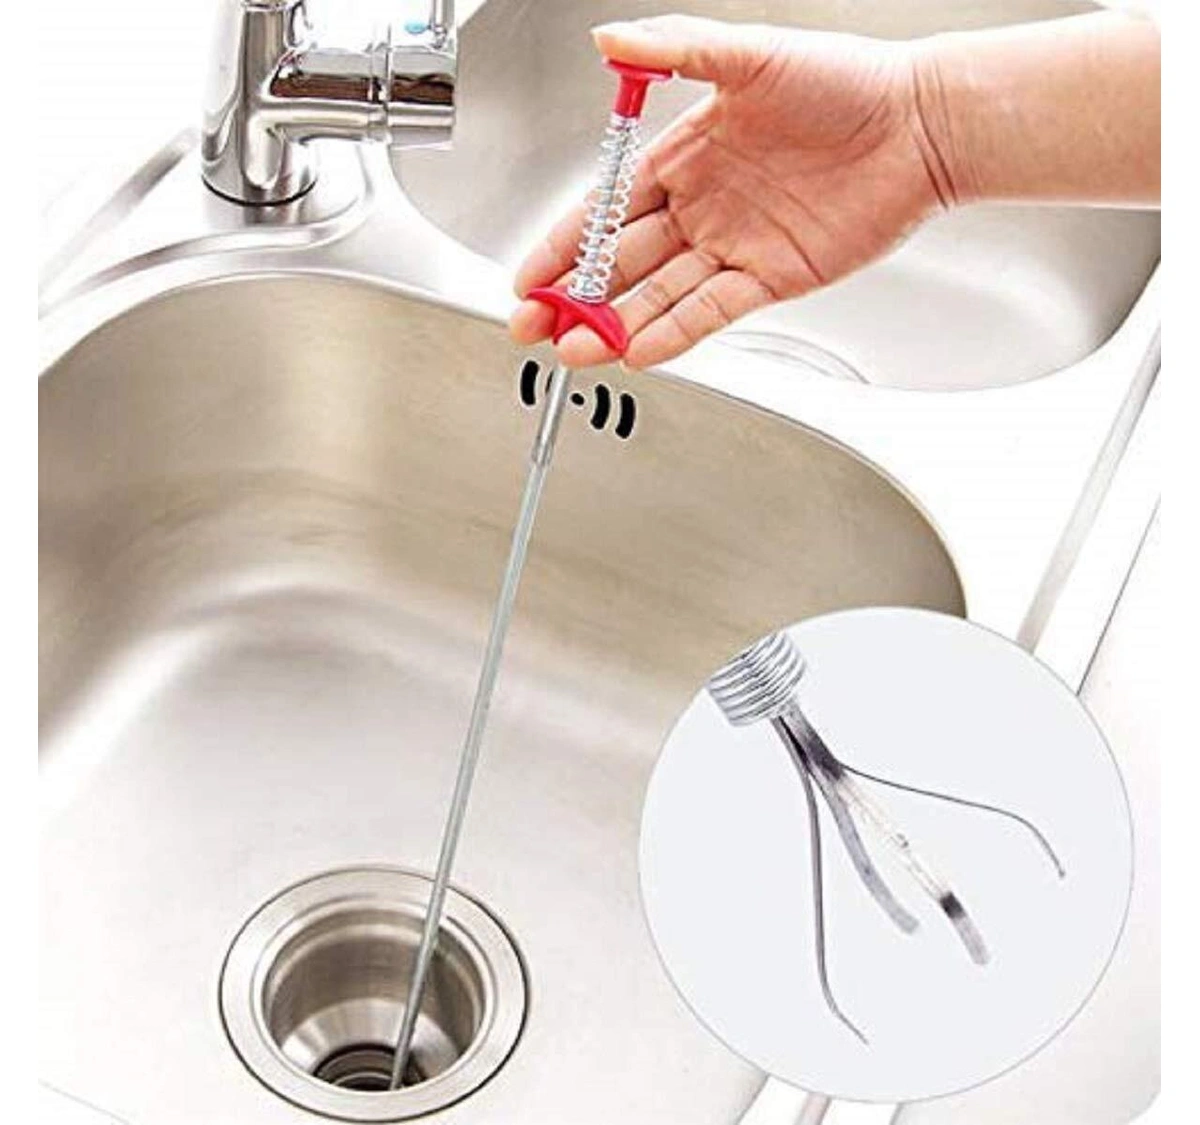 Bathroom Spring Pipe Dredging Tools Kitchen Sink Cleaning Hair Catcher Hair Clog  Remover Grabber for Shower Drains Bath Basin